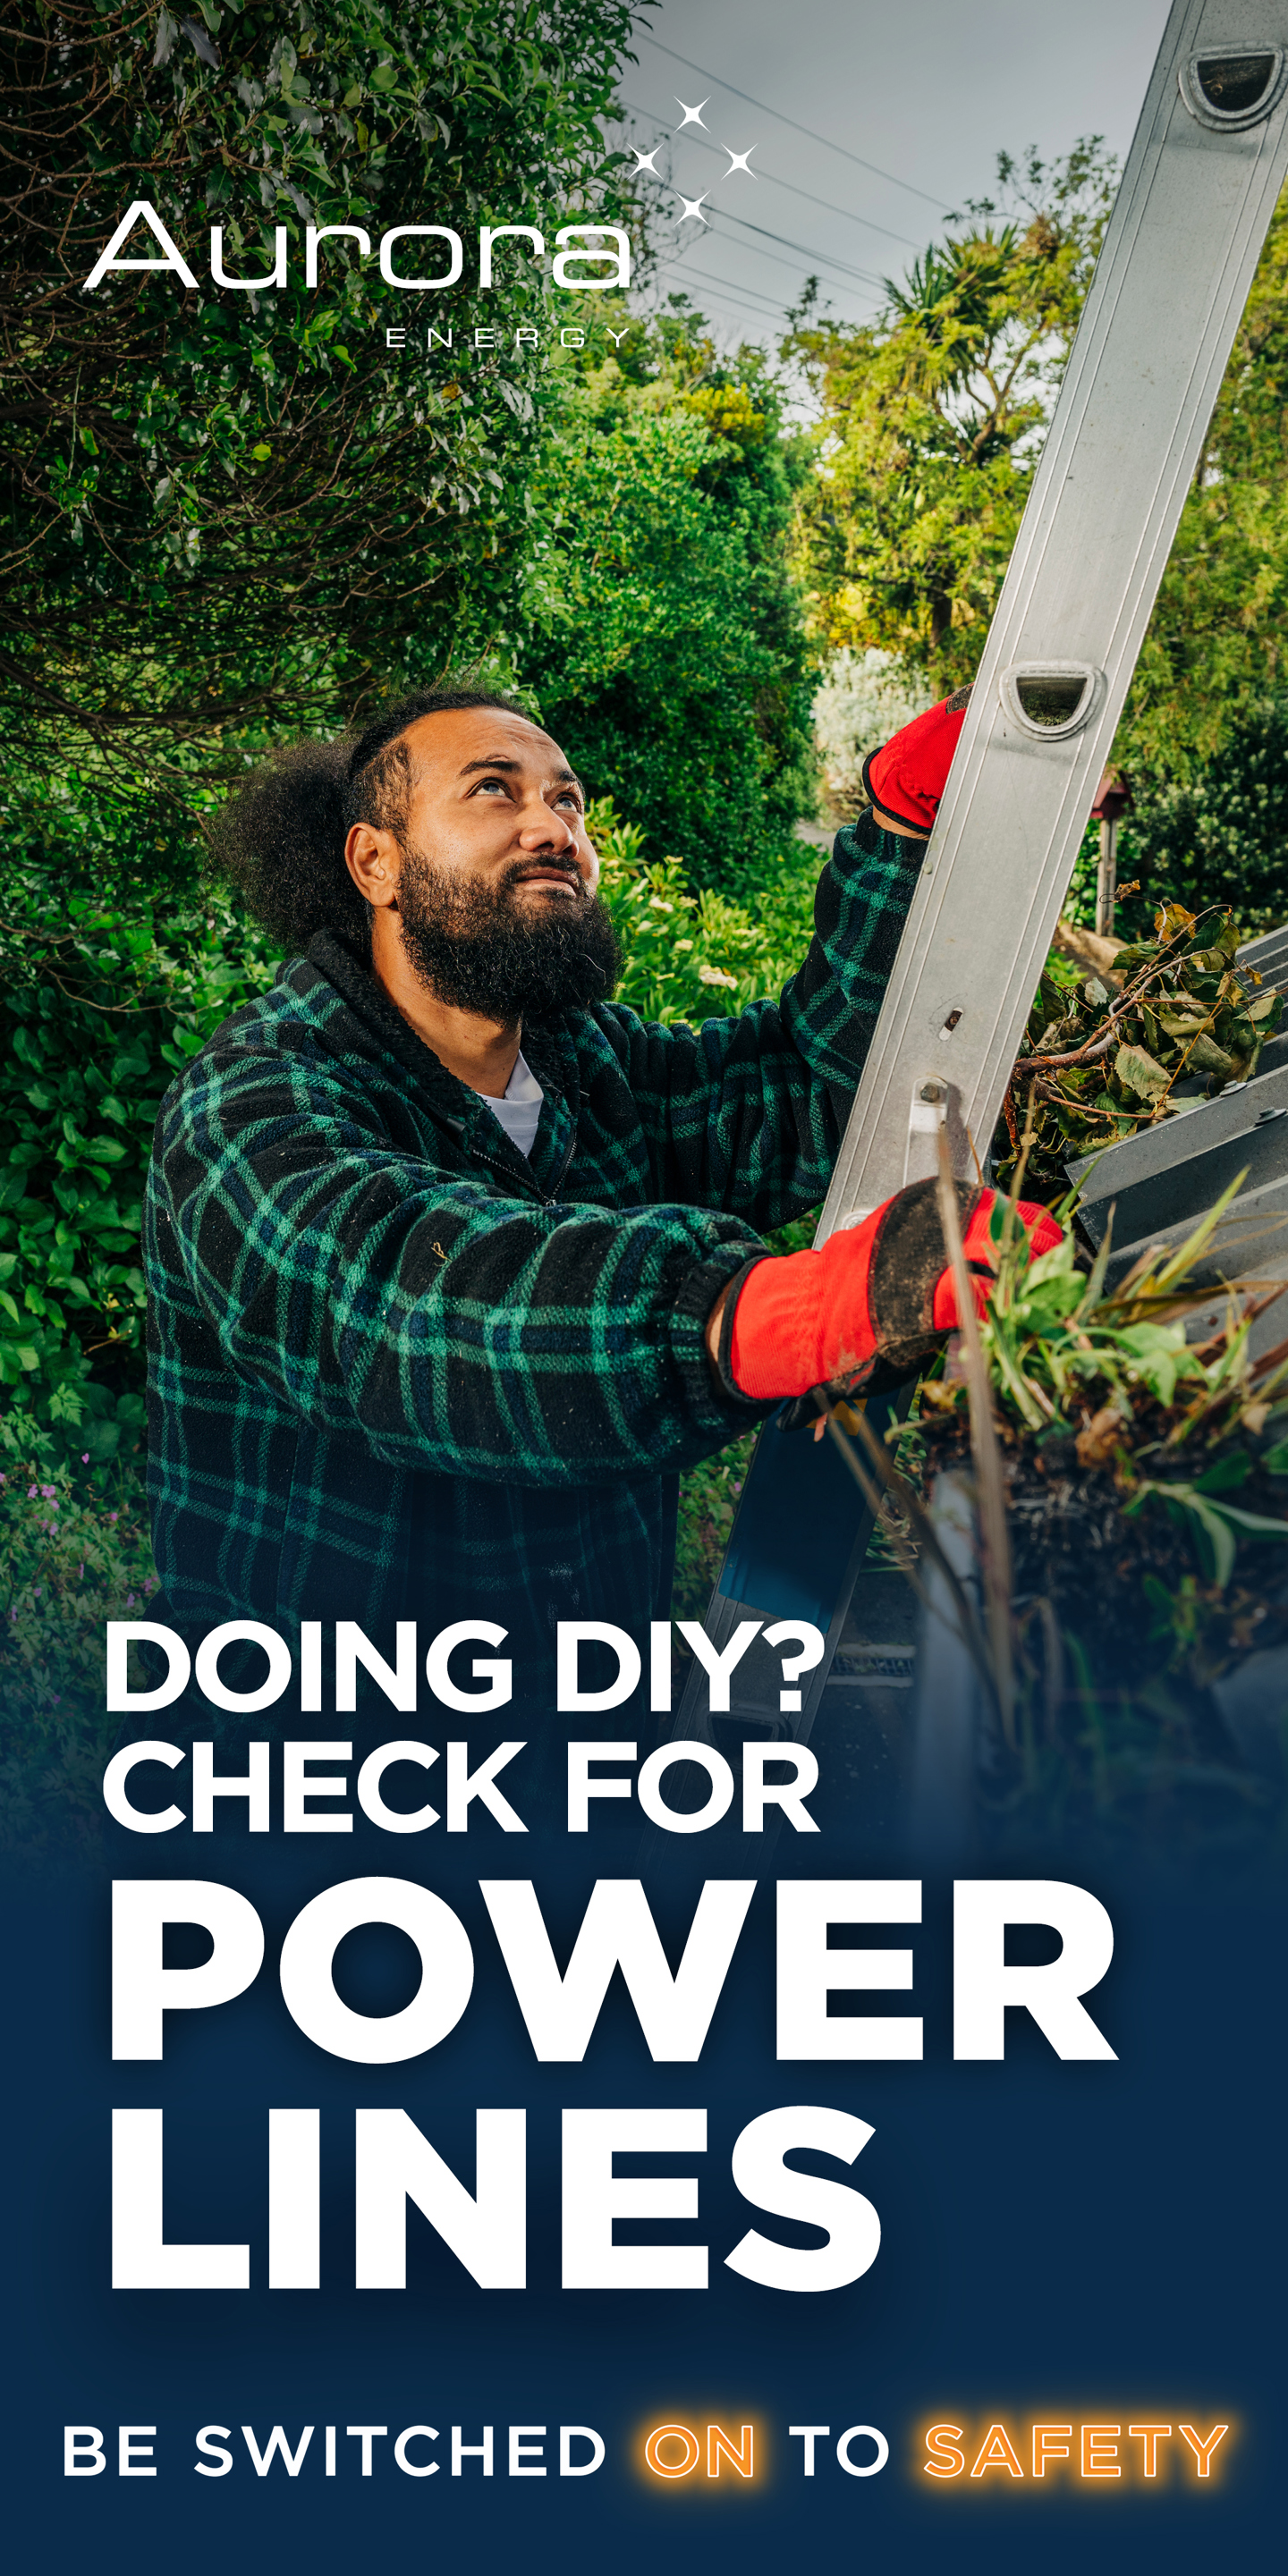 Doing DIY? Check for Power Lines
Be switched on to safety